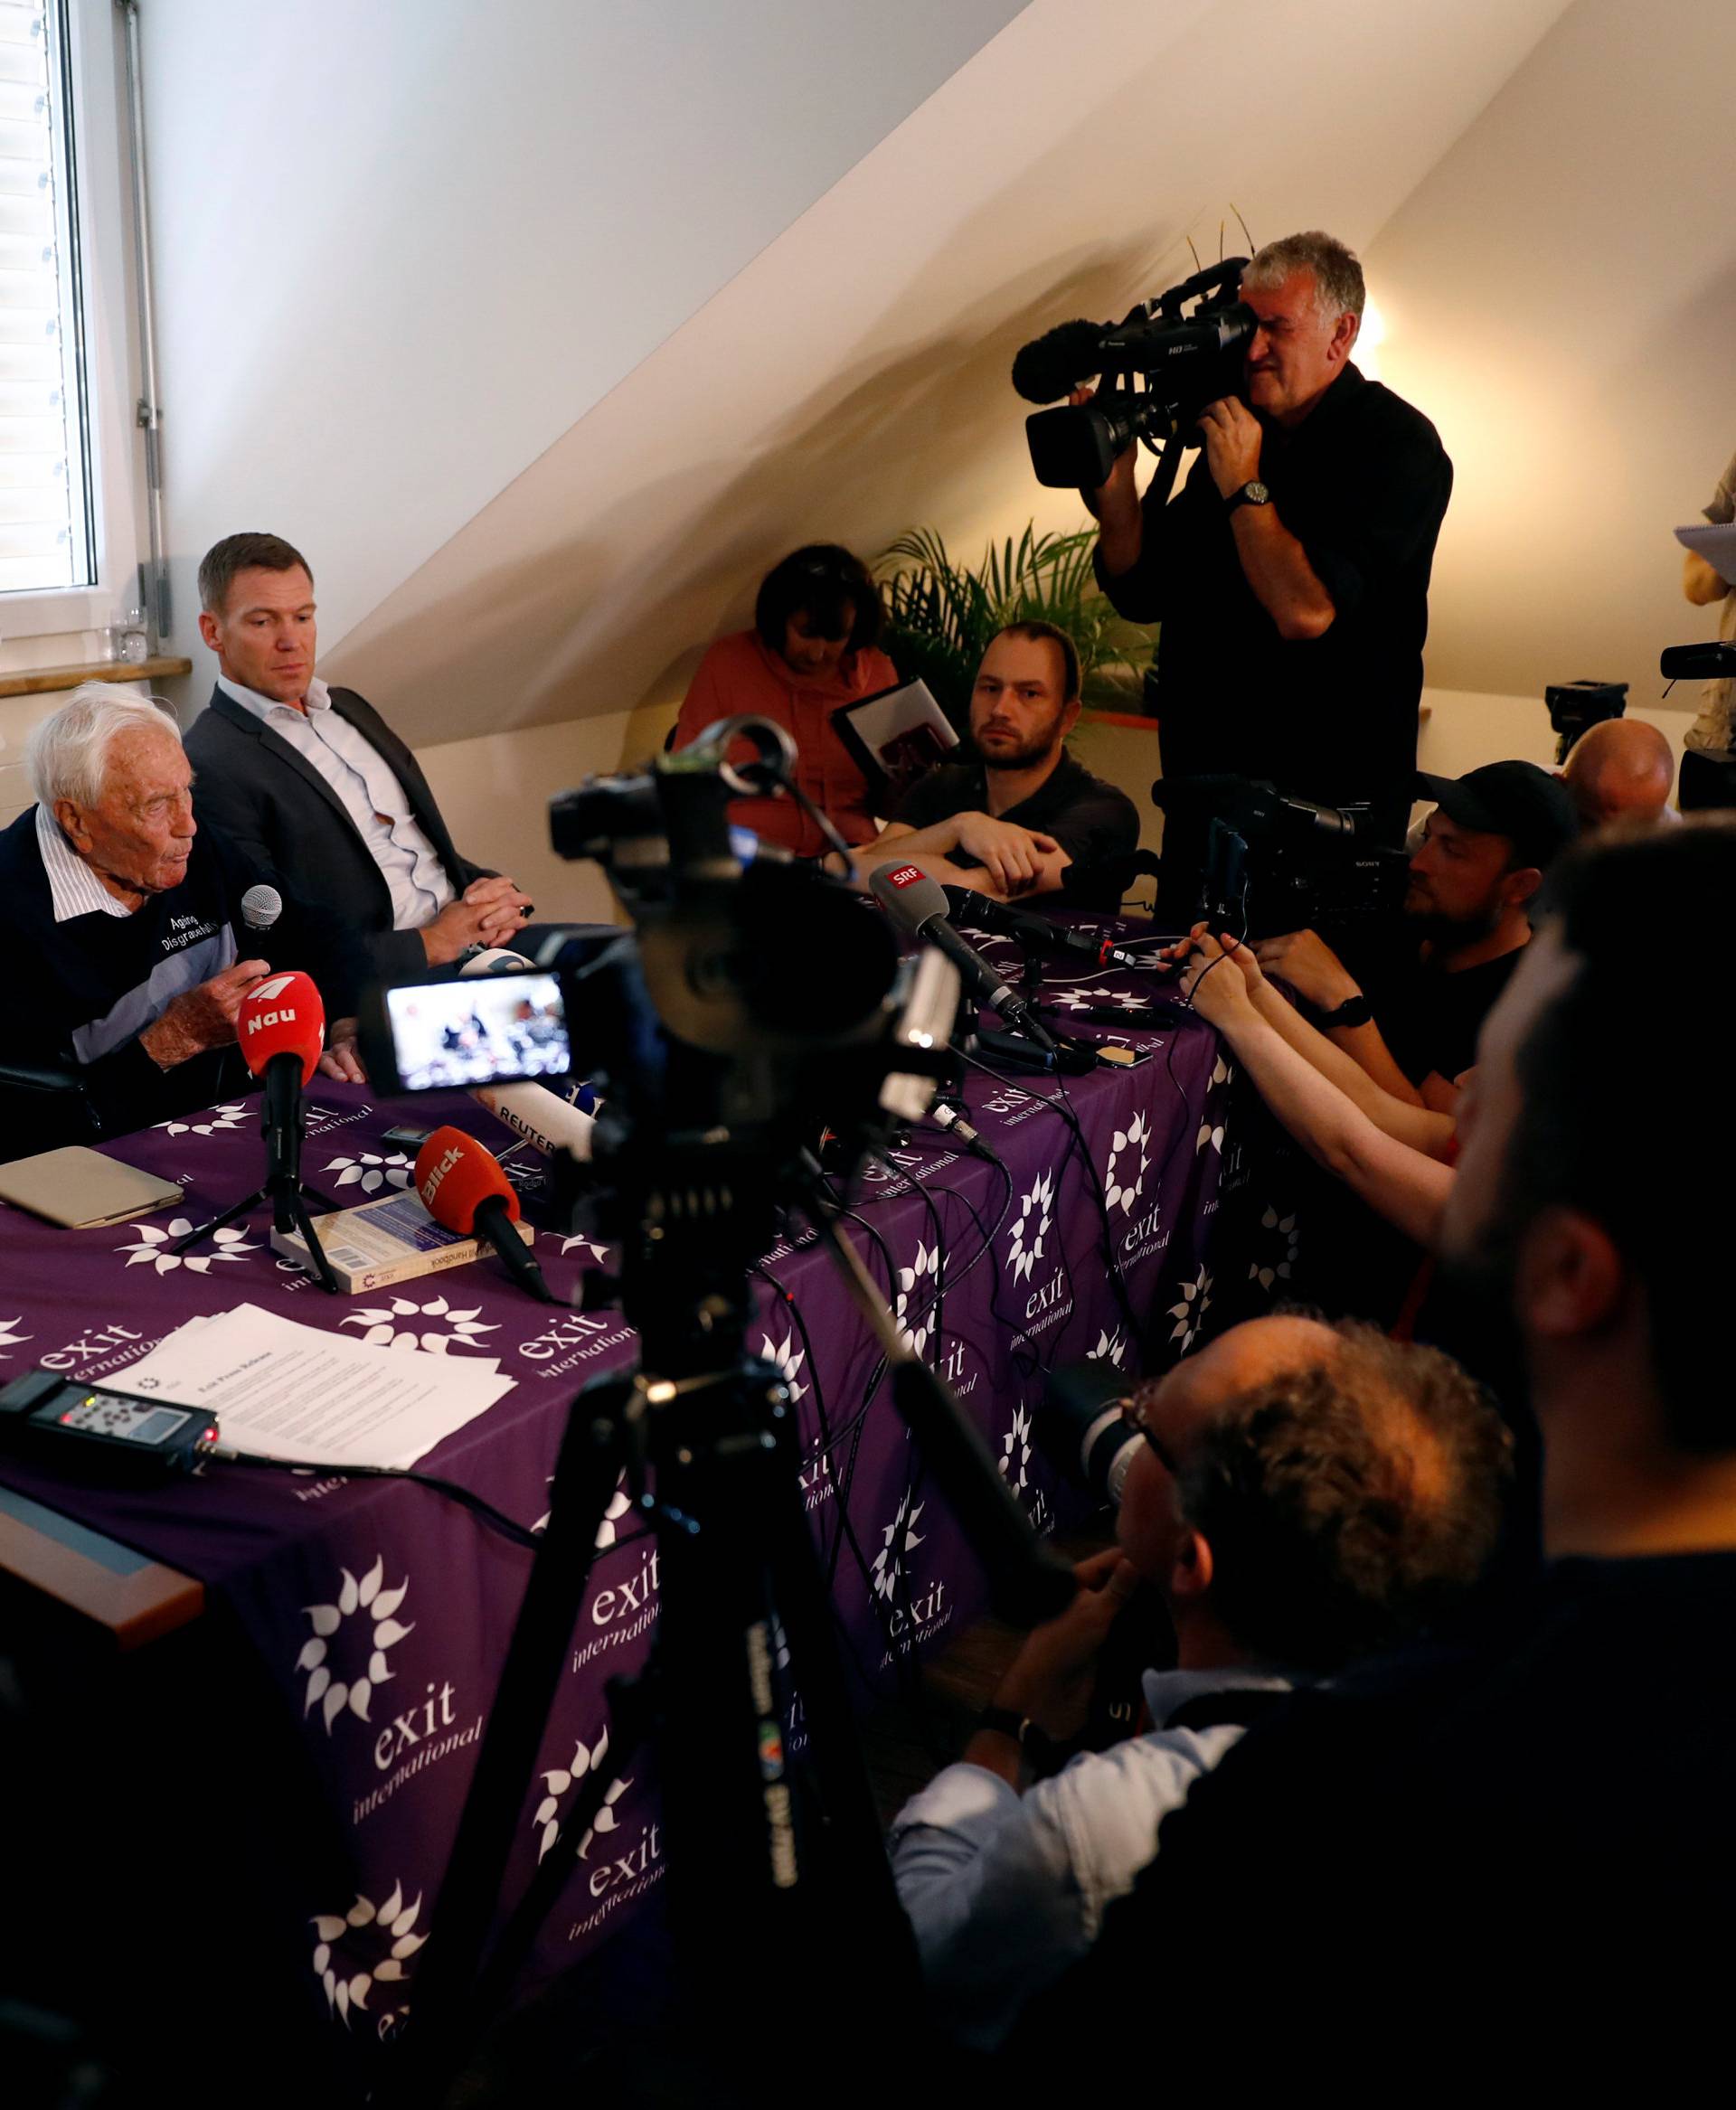 David Goodall holds a news a conference a day before he intends to take his own life in assisted suicide, in Basel